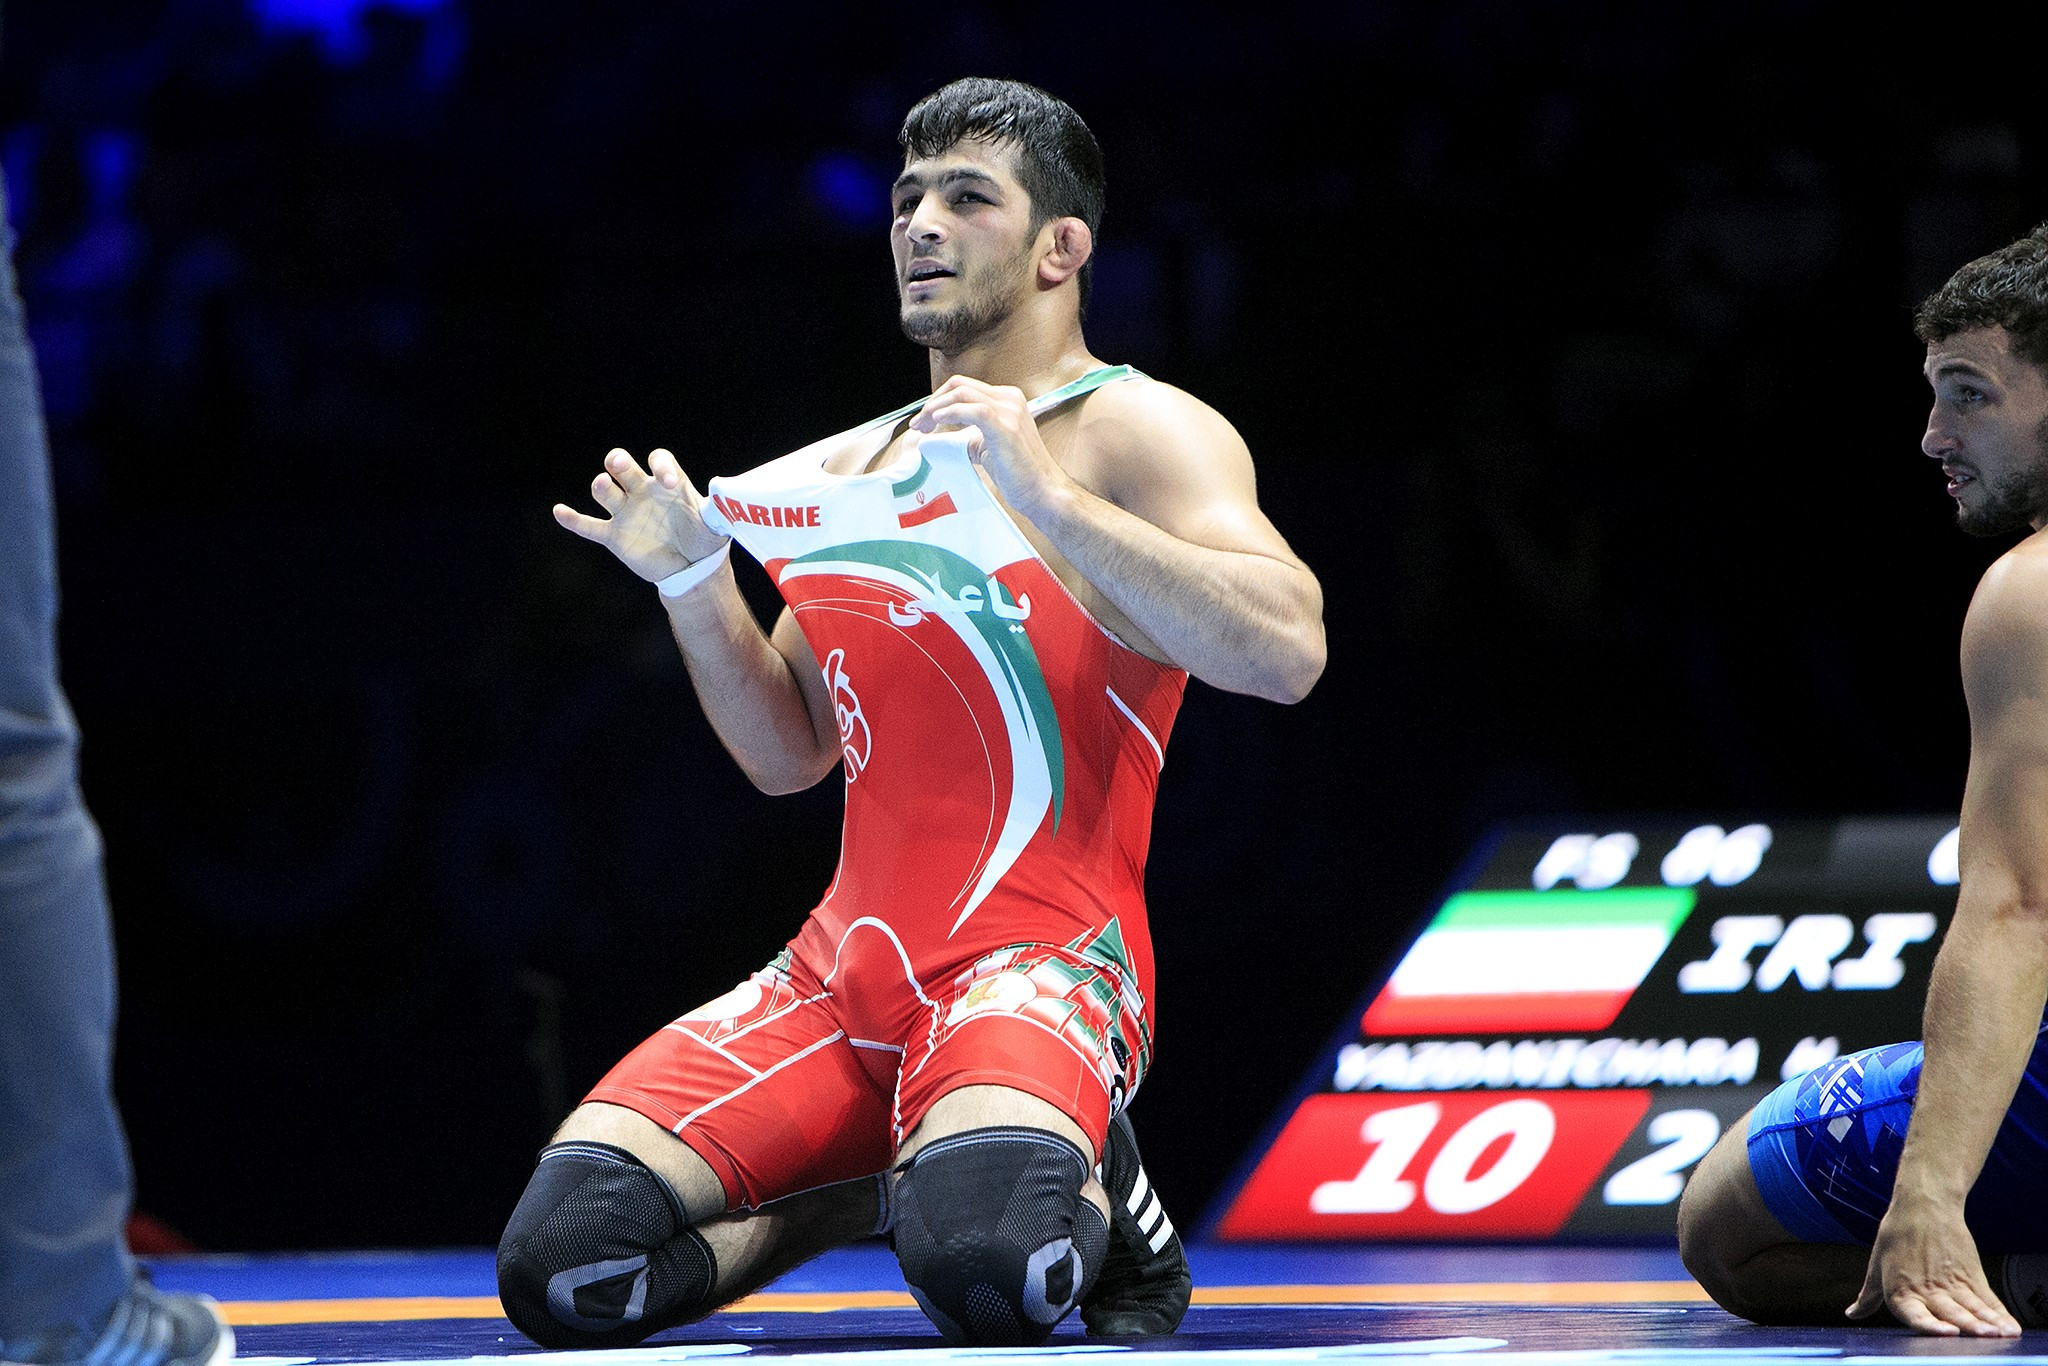 The Olympic 74kg champion won the match by technical superiority ©UWW